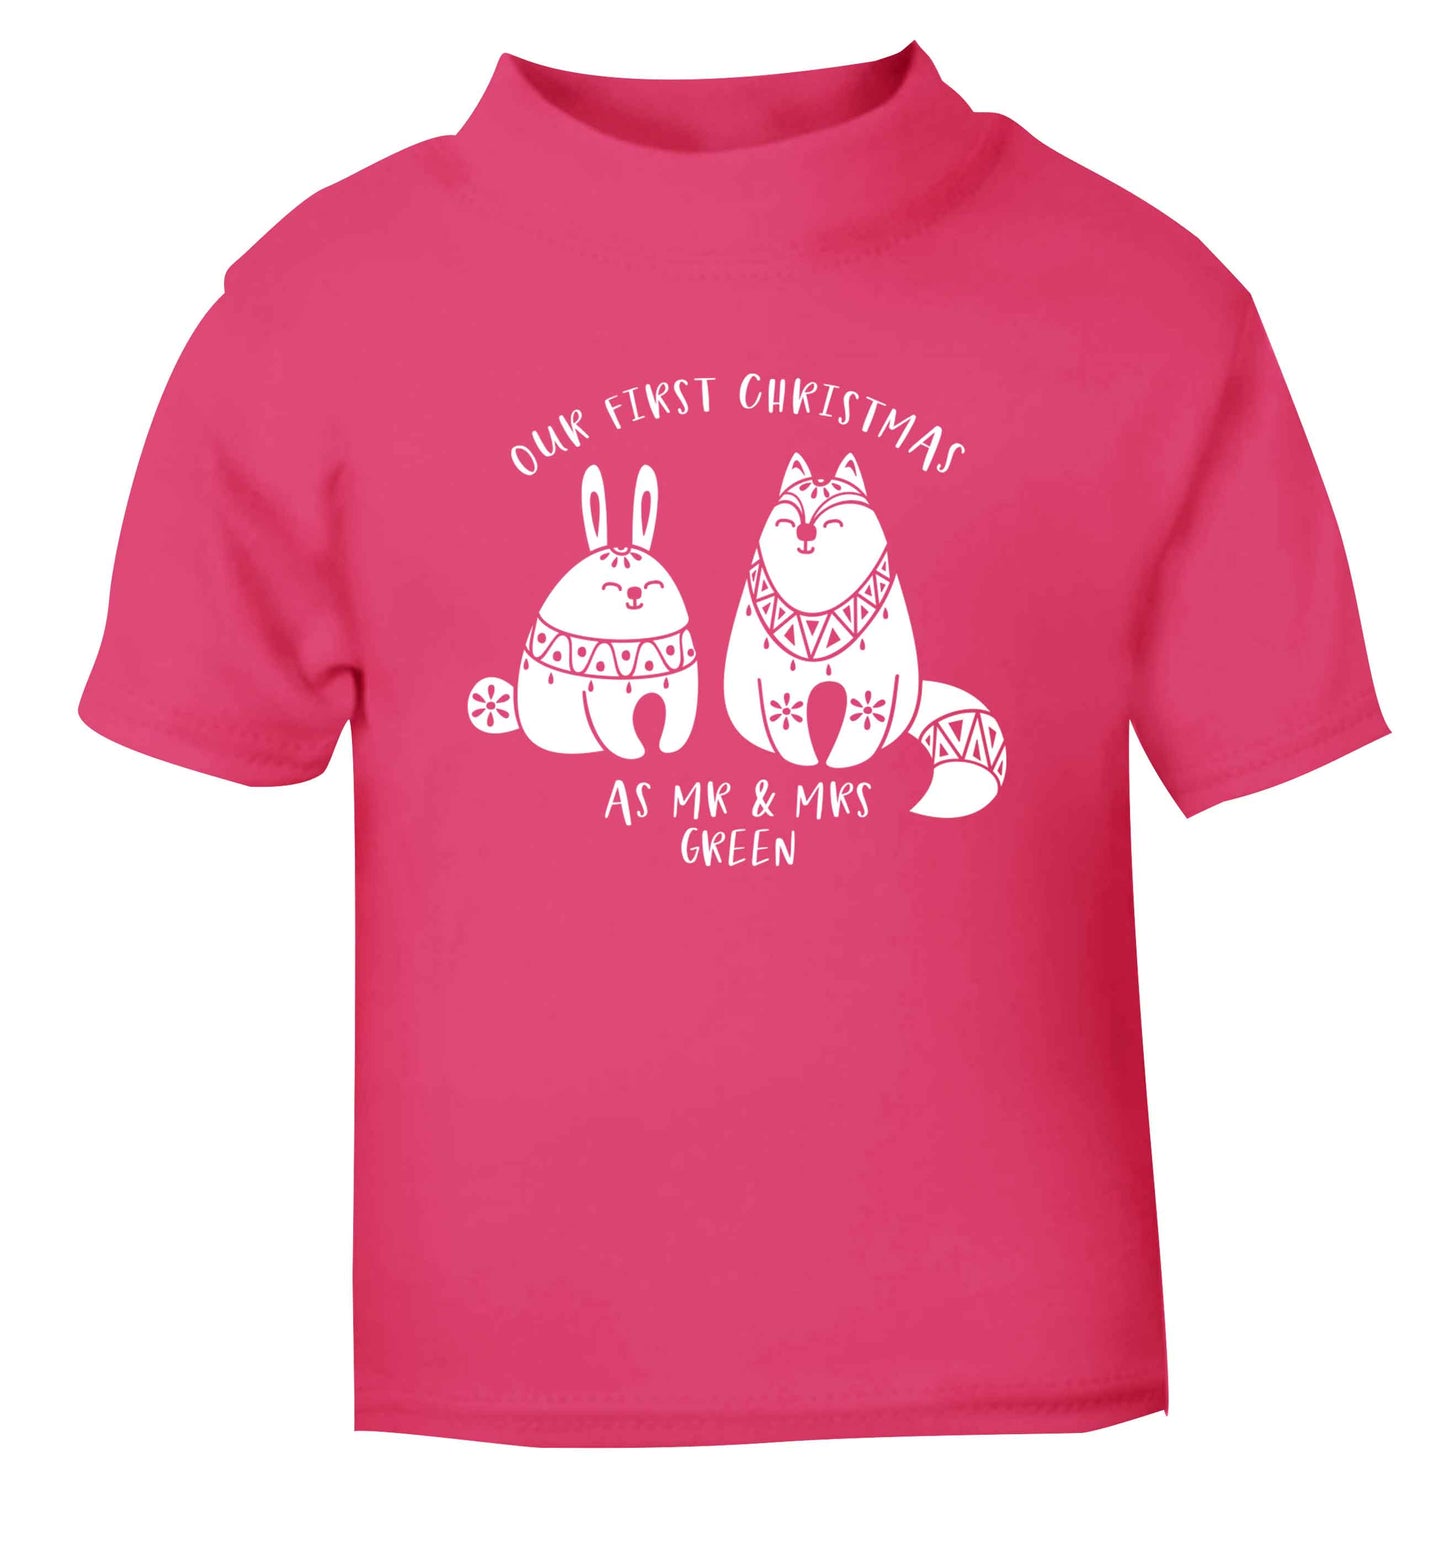 Our first Christmas as Mr & Mrs personalised pink Baby Toddler Tshirt 2 Years